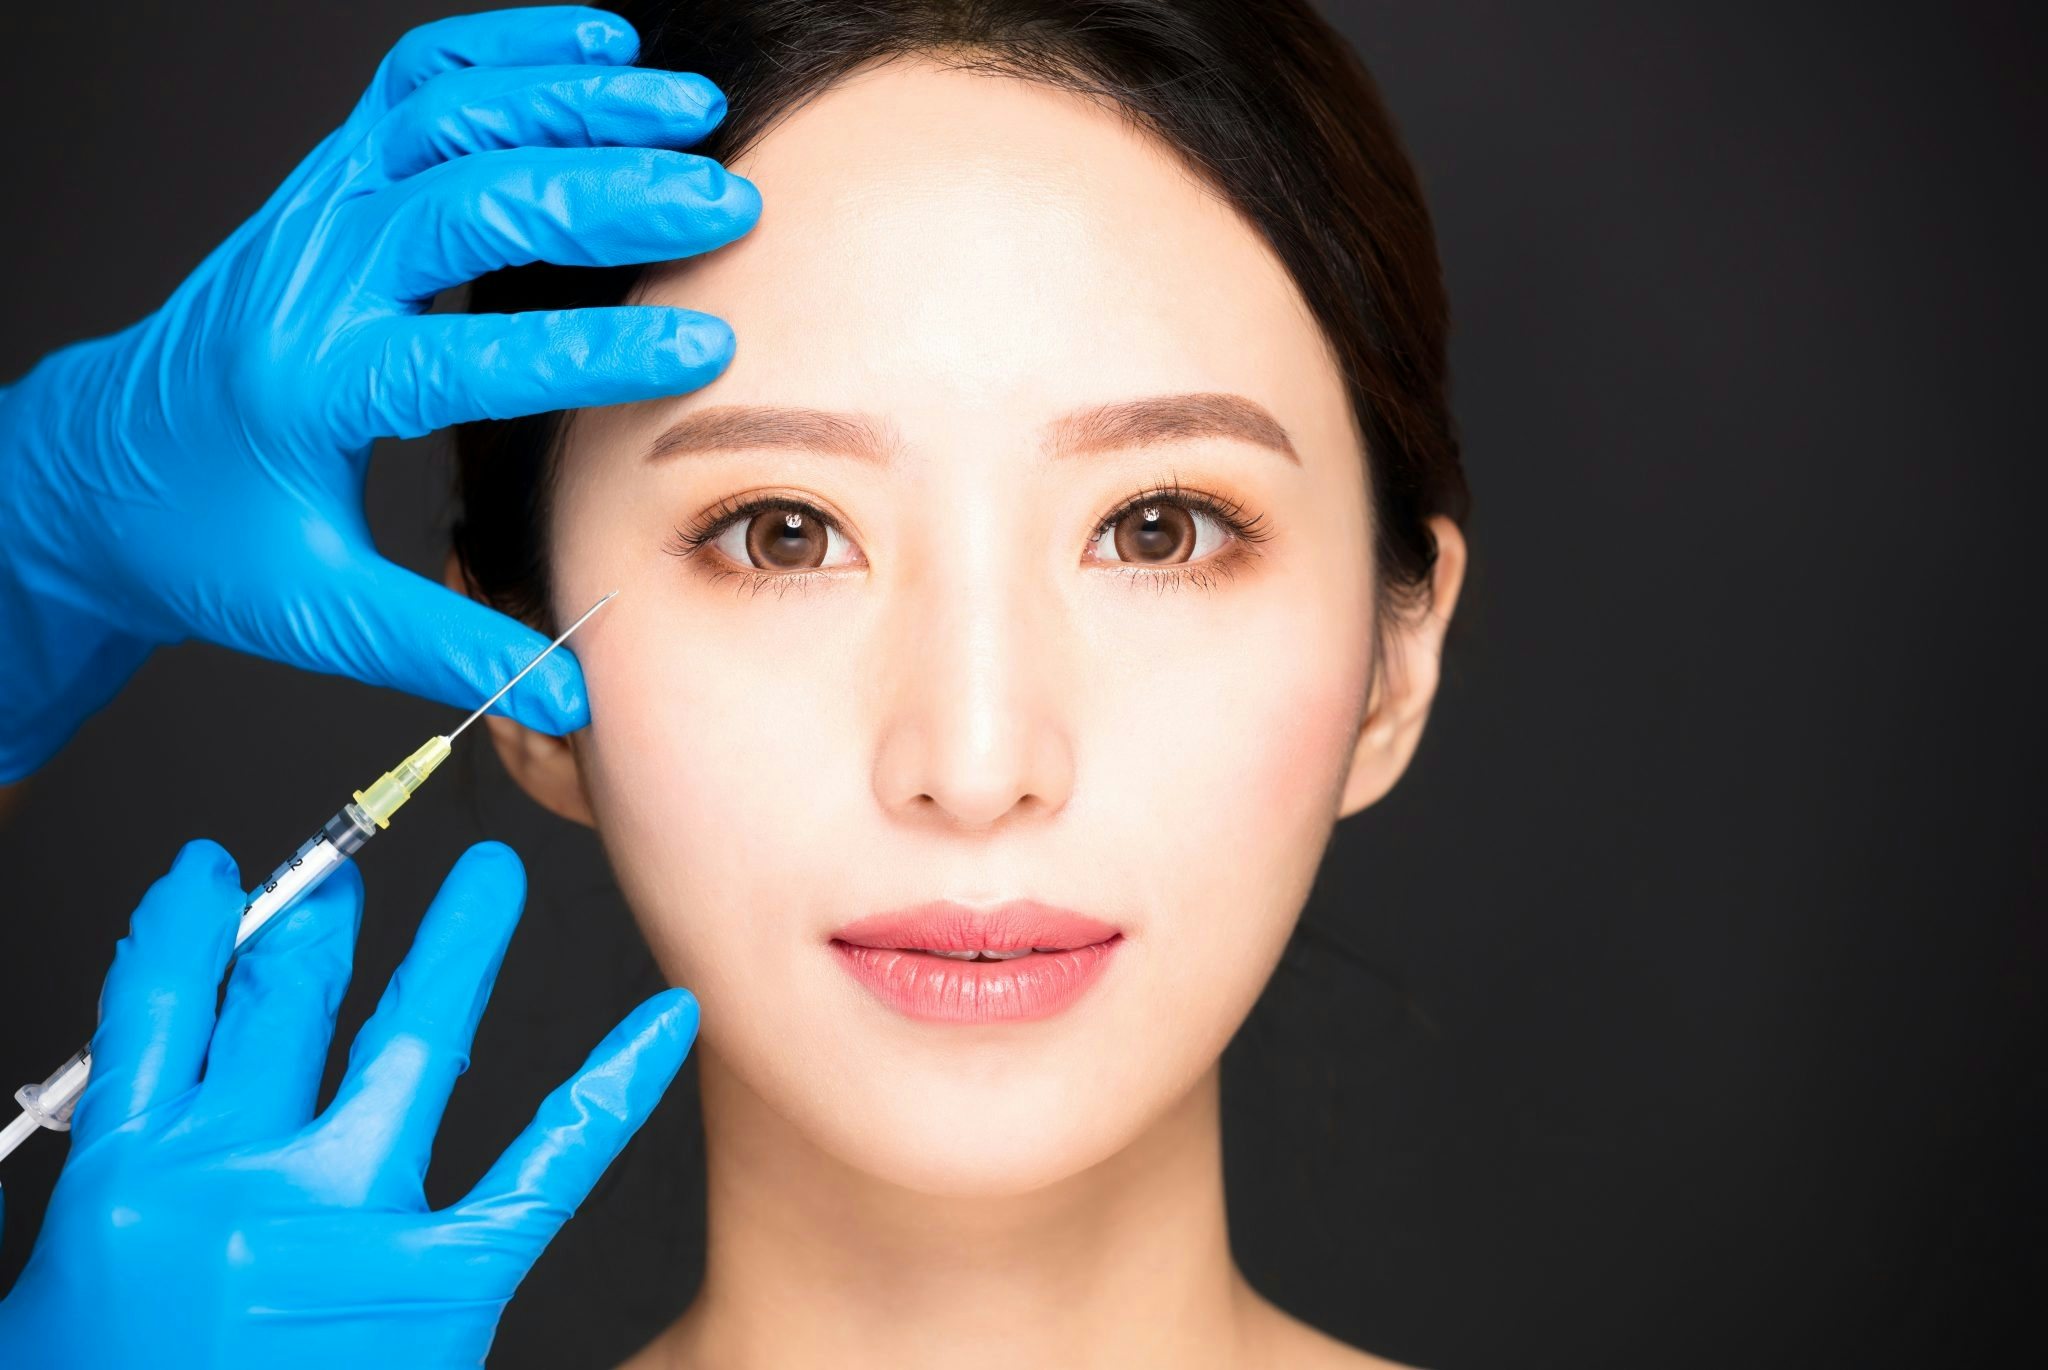 China’s cosmetic surgery industry is expected to reach $116.3 billion by 2020, according to a report by HSBC. Photo: Shutterstock